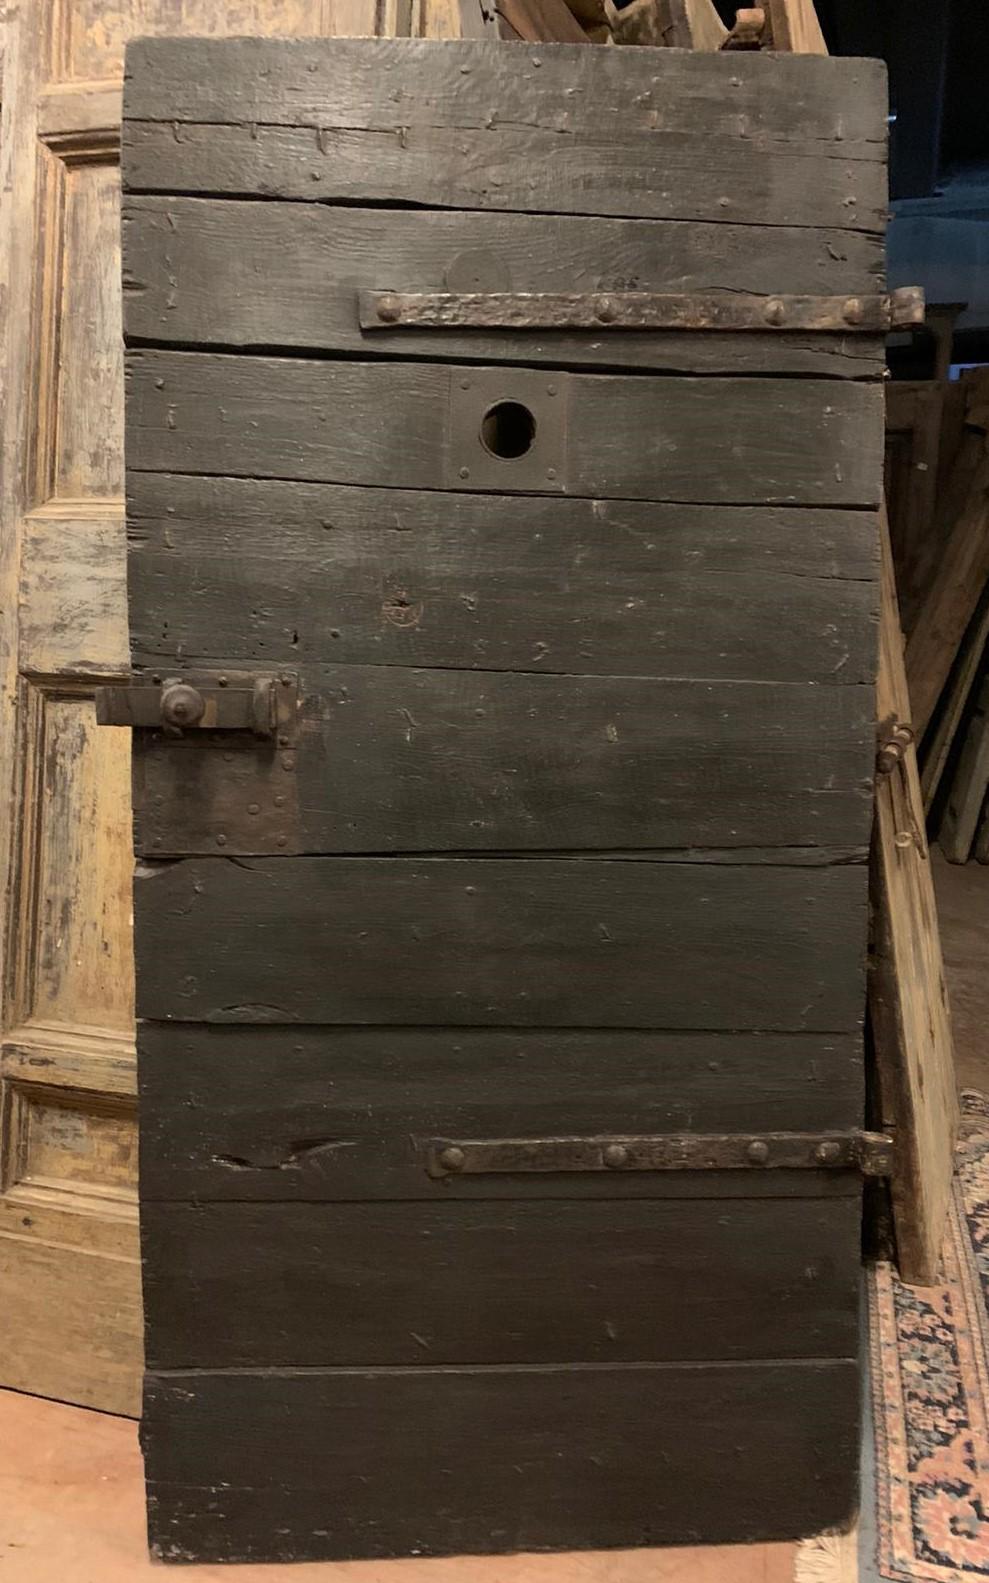 Ancient prison door, hand-lacquered black, built with nails that held the door boards together, beautiful door with peephole, original irons with closure, built at the beginning of the 19th century for a historic prison in Italy.
smooth back in raw